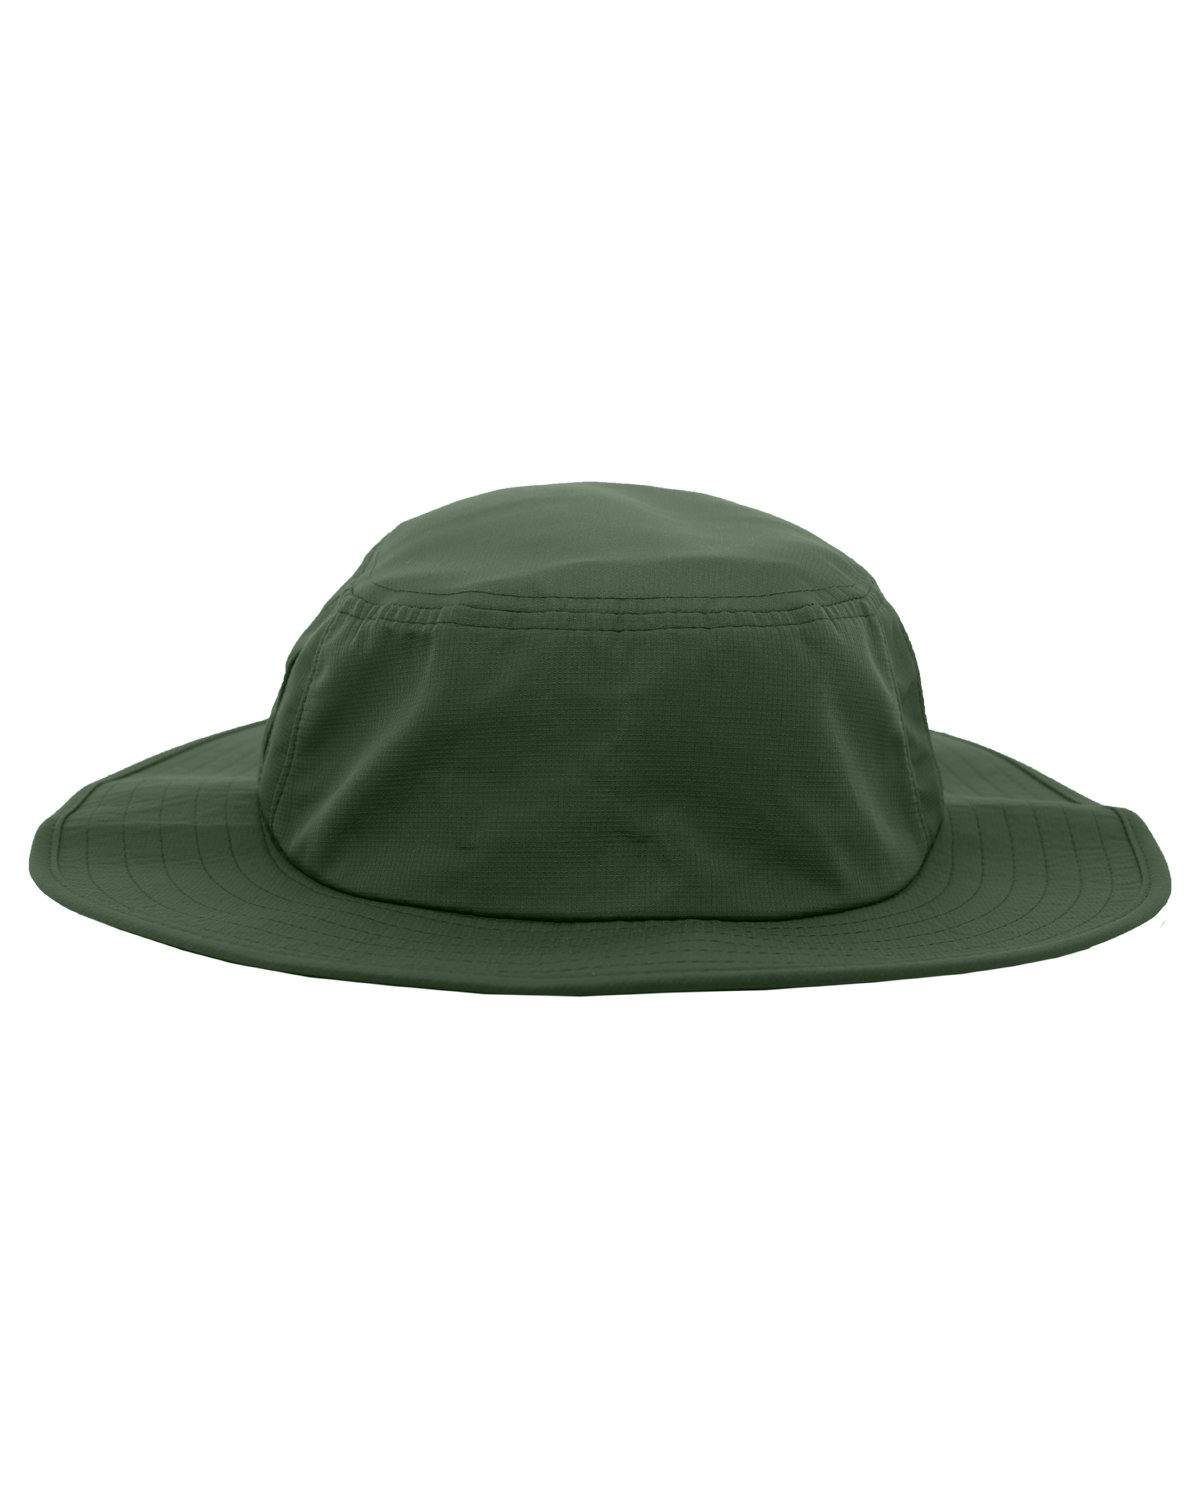 Image for Manta Ray Boonie Hat